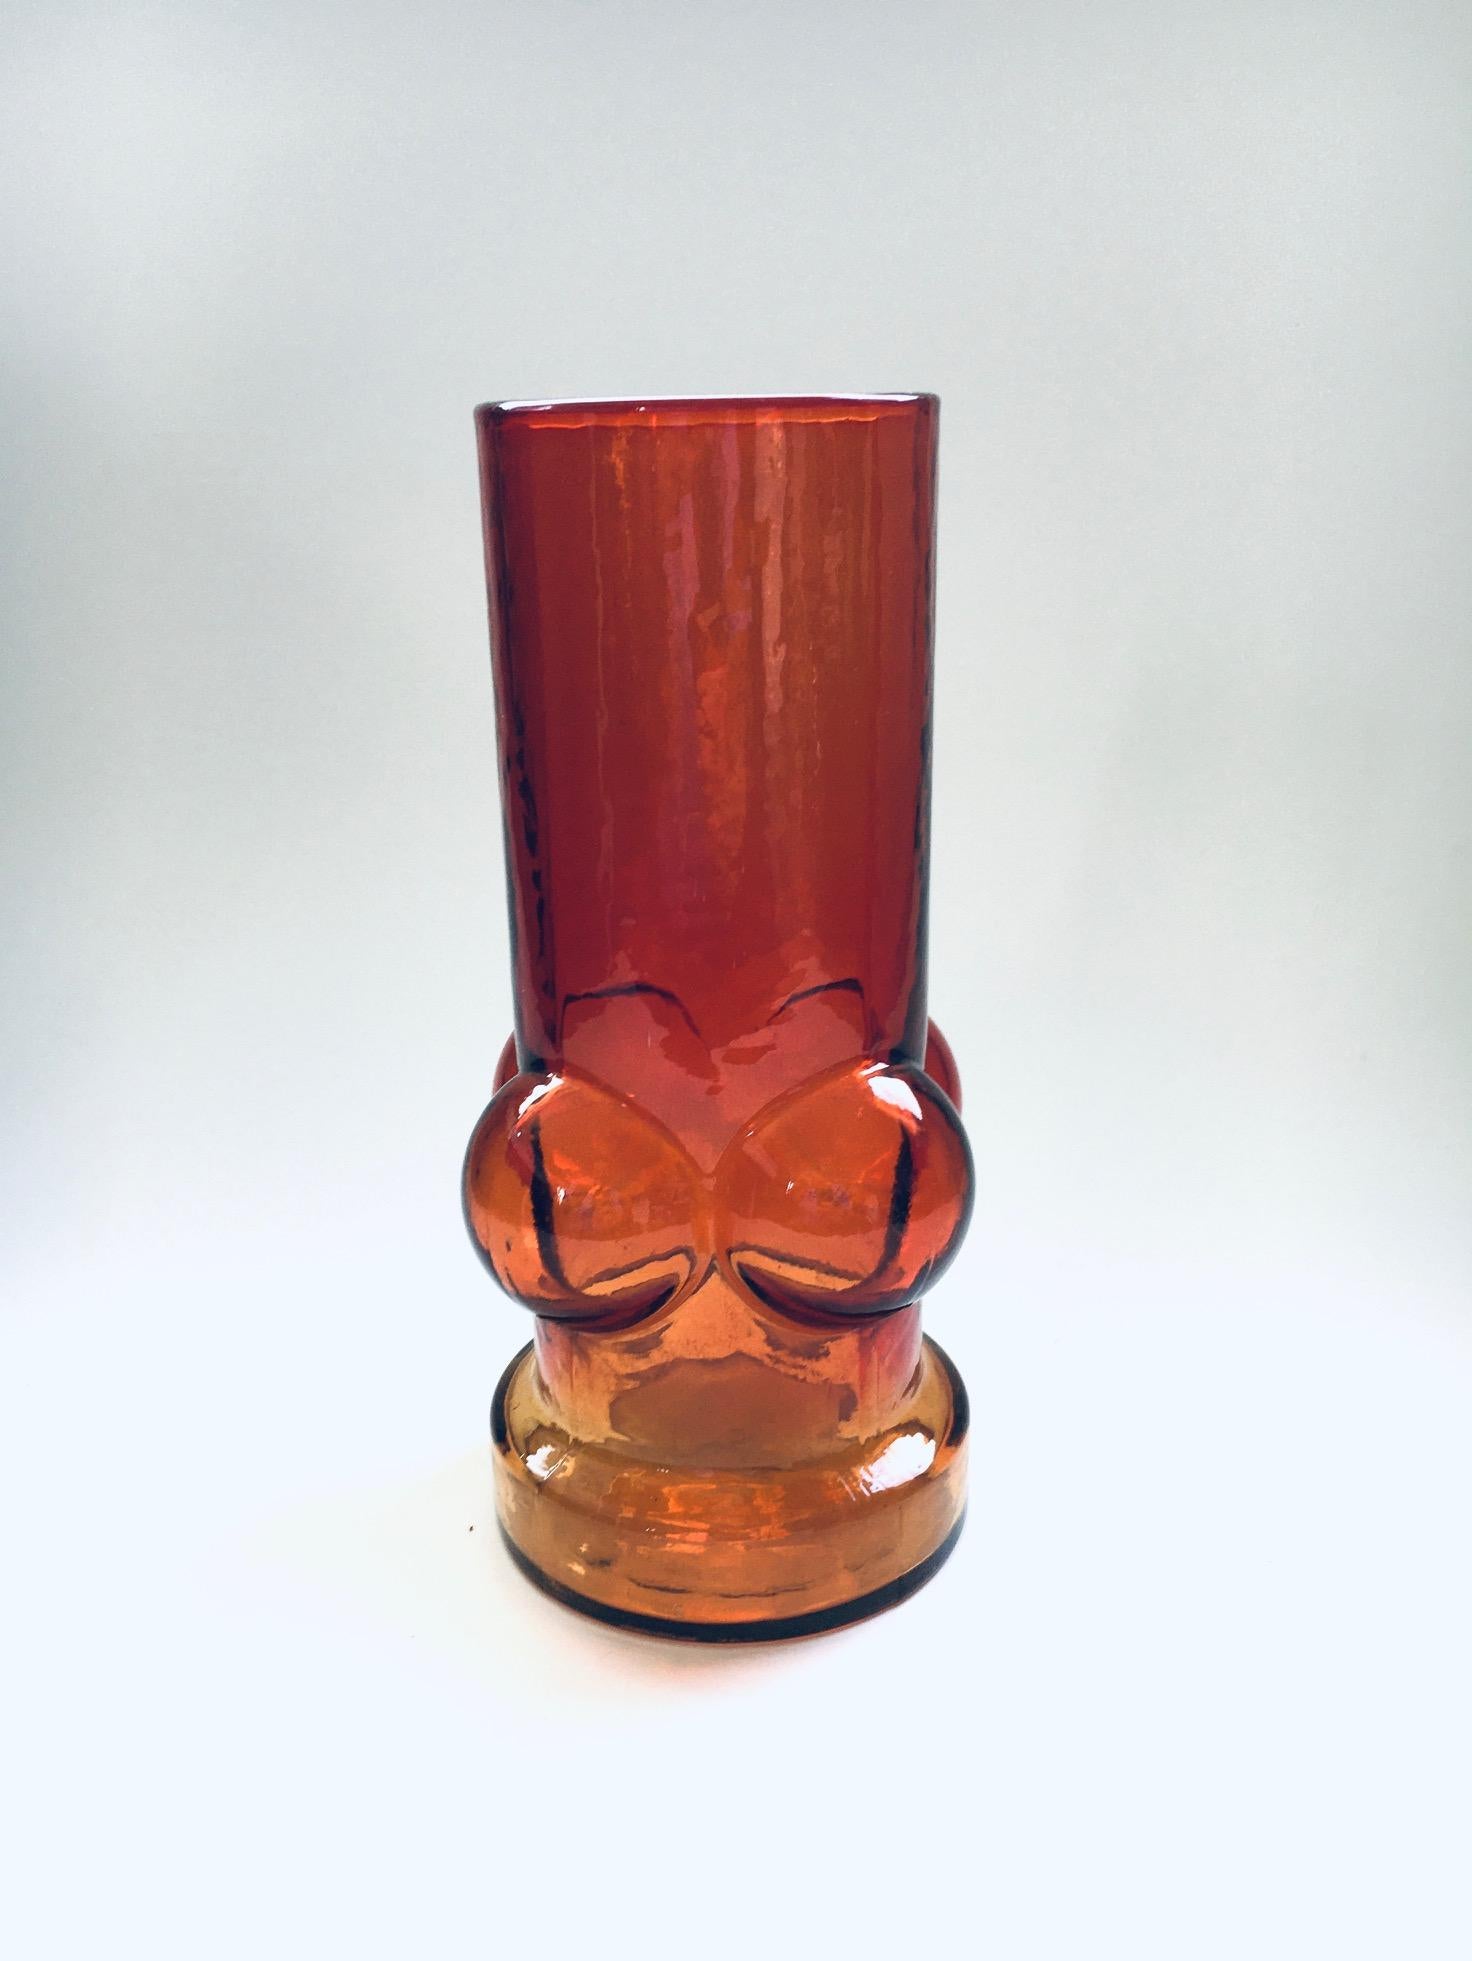 Vintage Midcentury Modern Scandinavian Design Rare Art Glass Vase by Nanny Still, made in Finland 1960's. Orange to red fade pressed glass vase with ball sphere shapes and hooped bottom. In perfect condition. Measures 22,5cm x 11,5cm x 11,5cm.